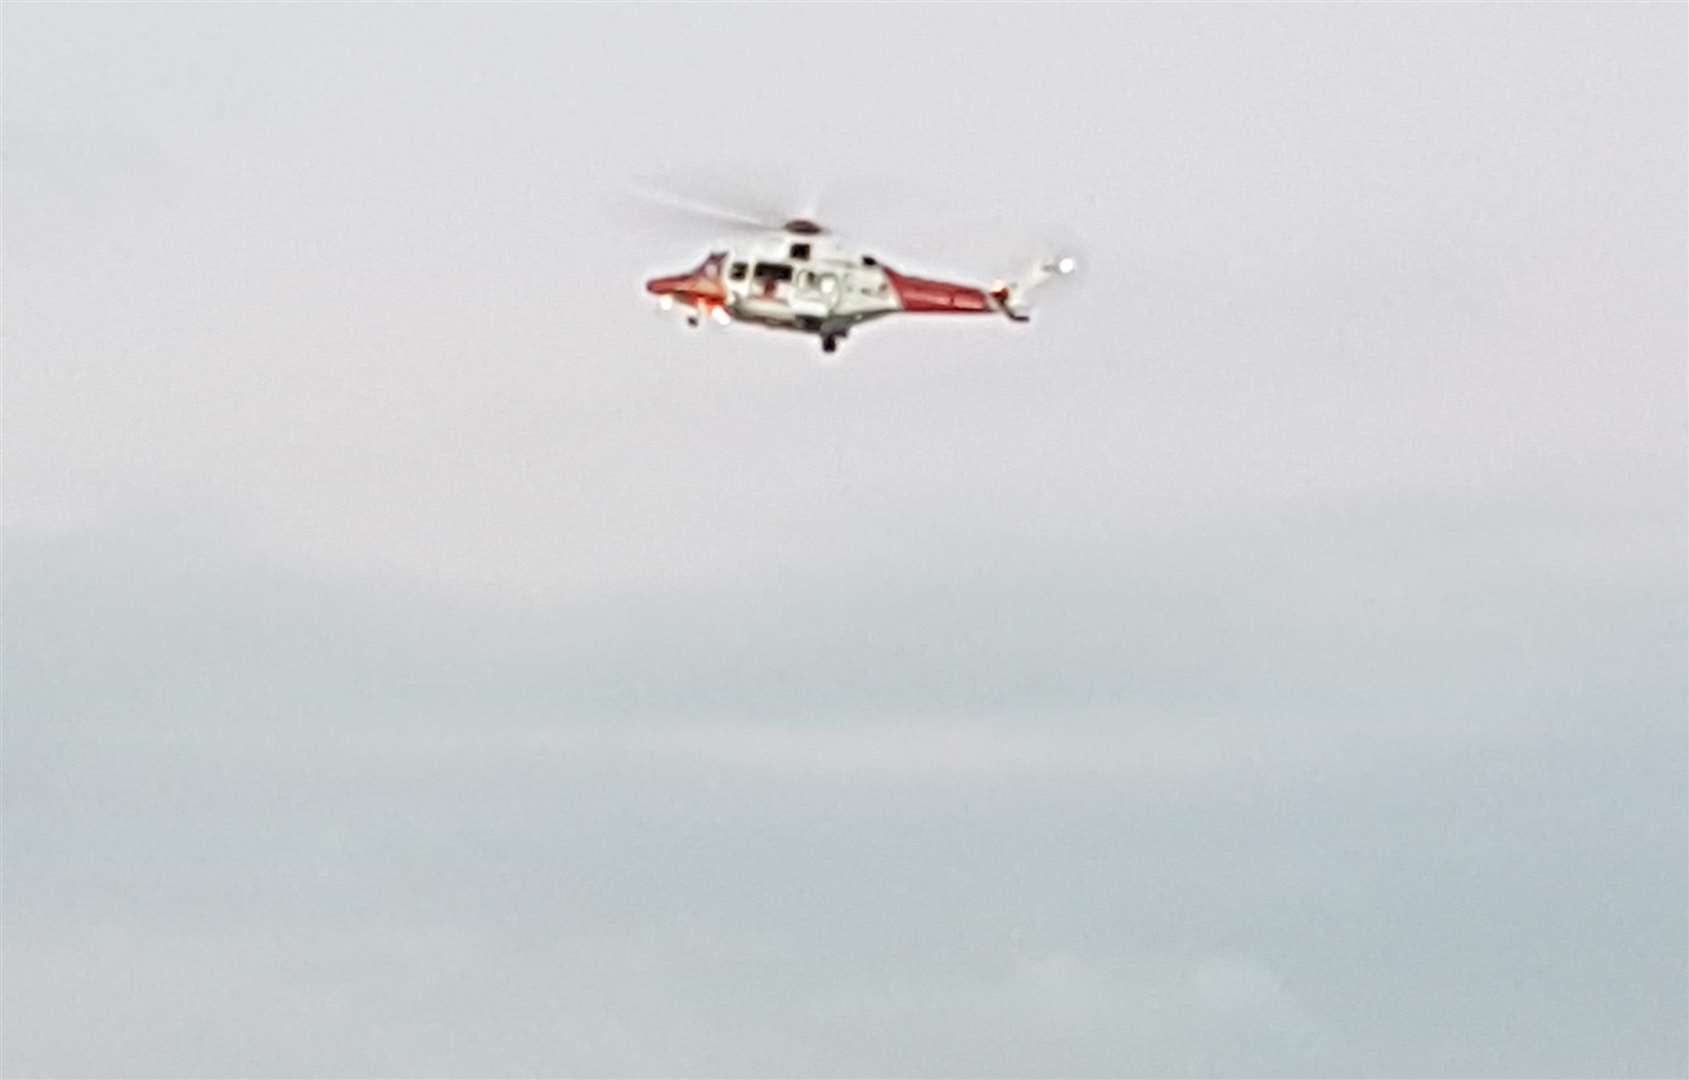 The Coastgaurd helicopter in operation during the seach (6441559)